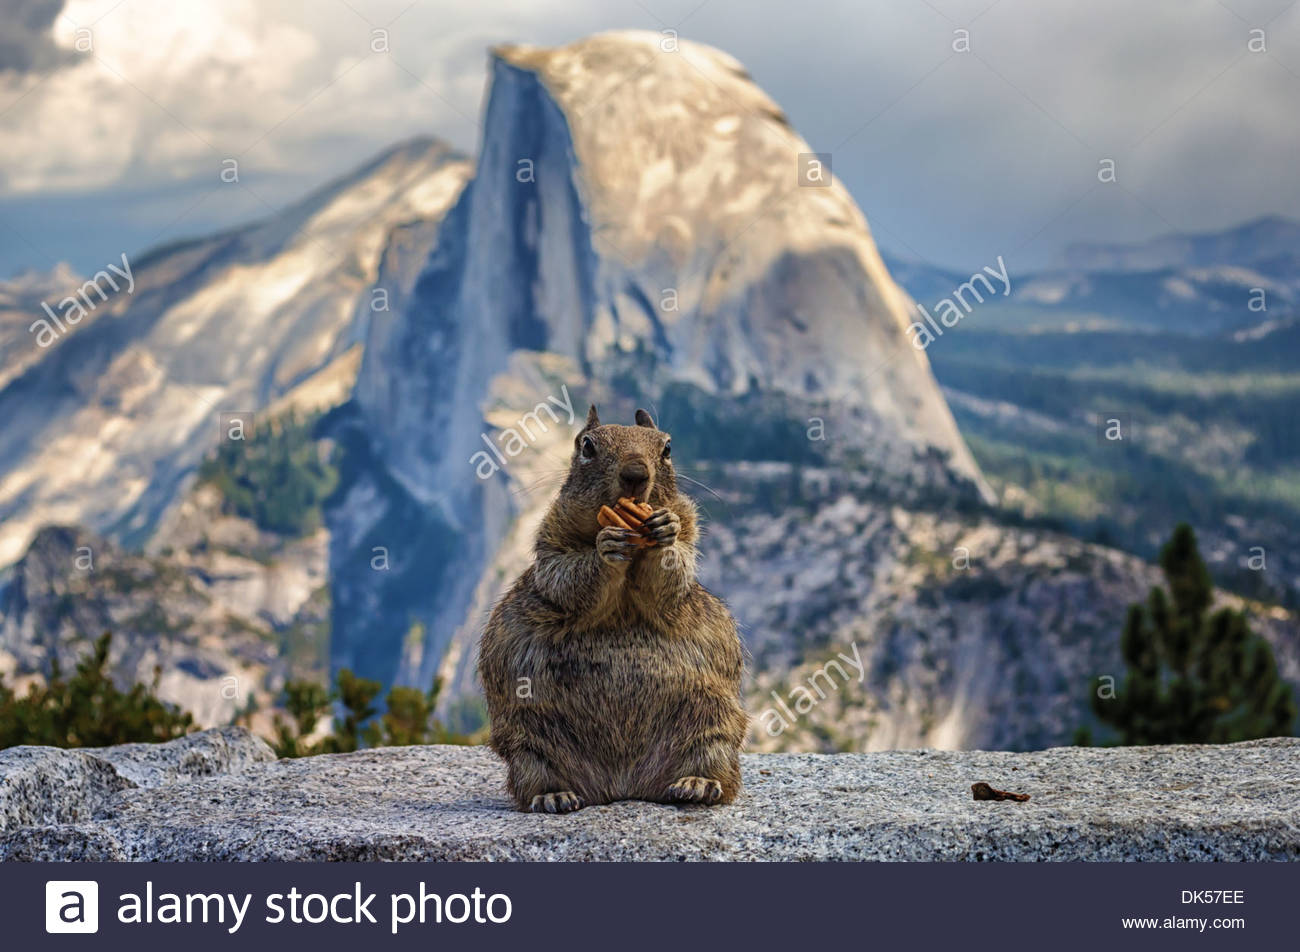 A Squirrel Eating Nut At Glacier Point With Half Dome In The